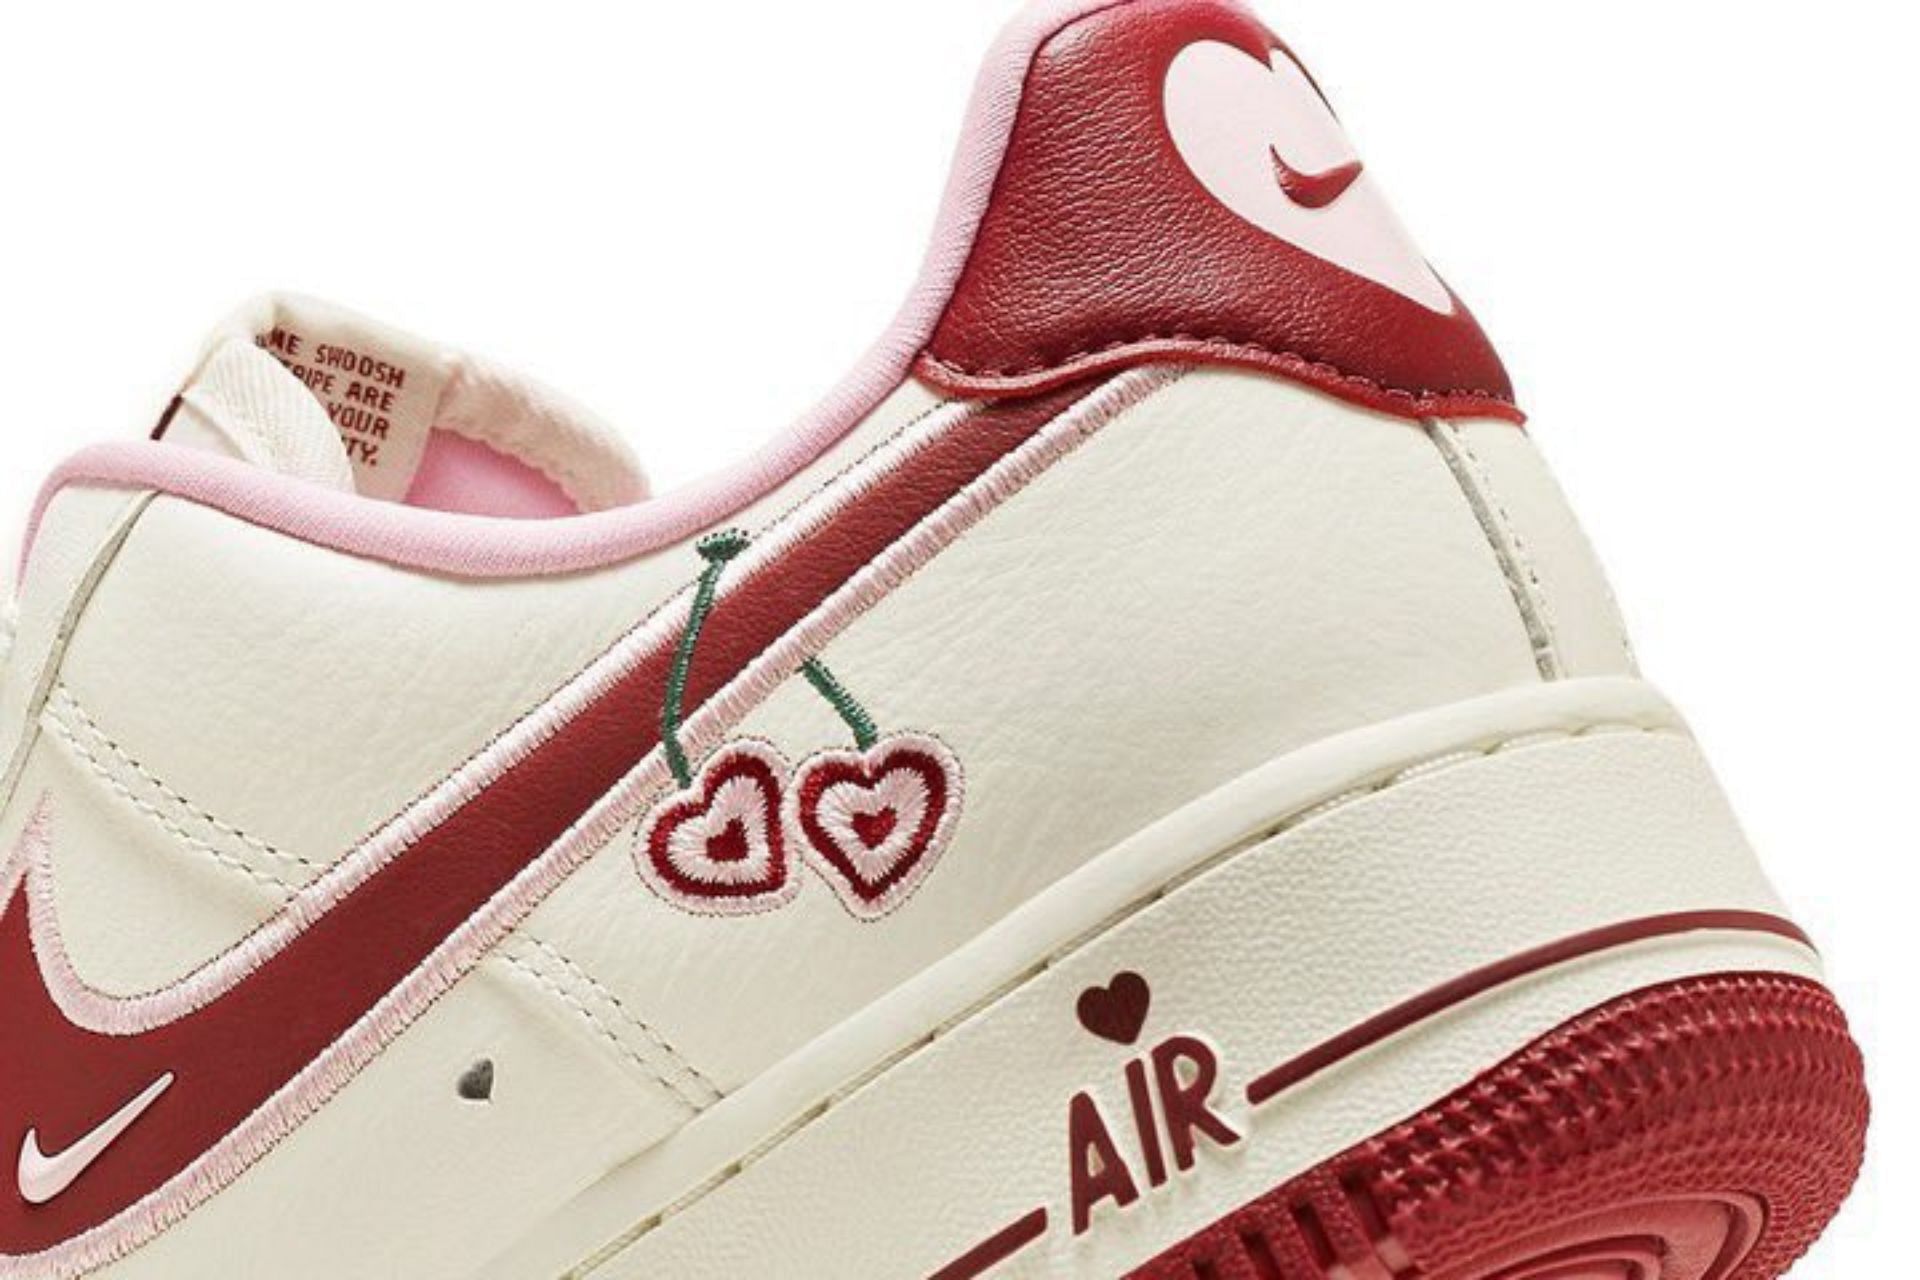 Take a look at the heart motifs embroidered around the heel counters (Image via Nike)